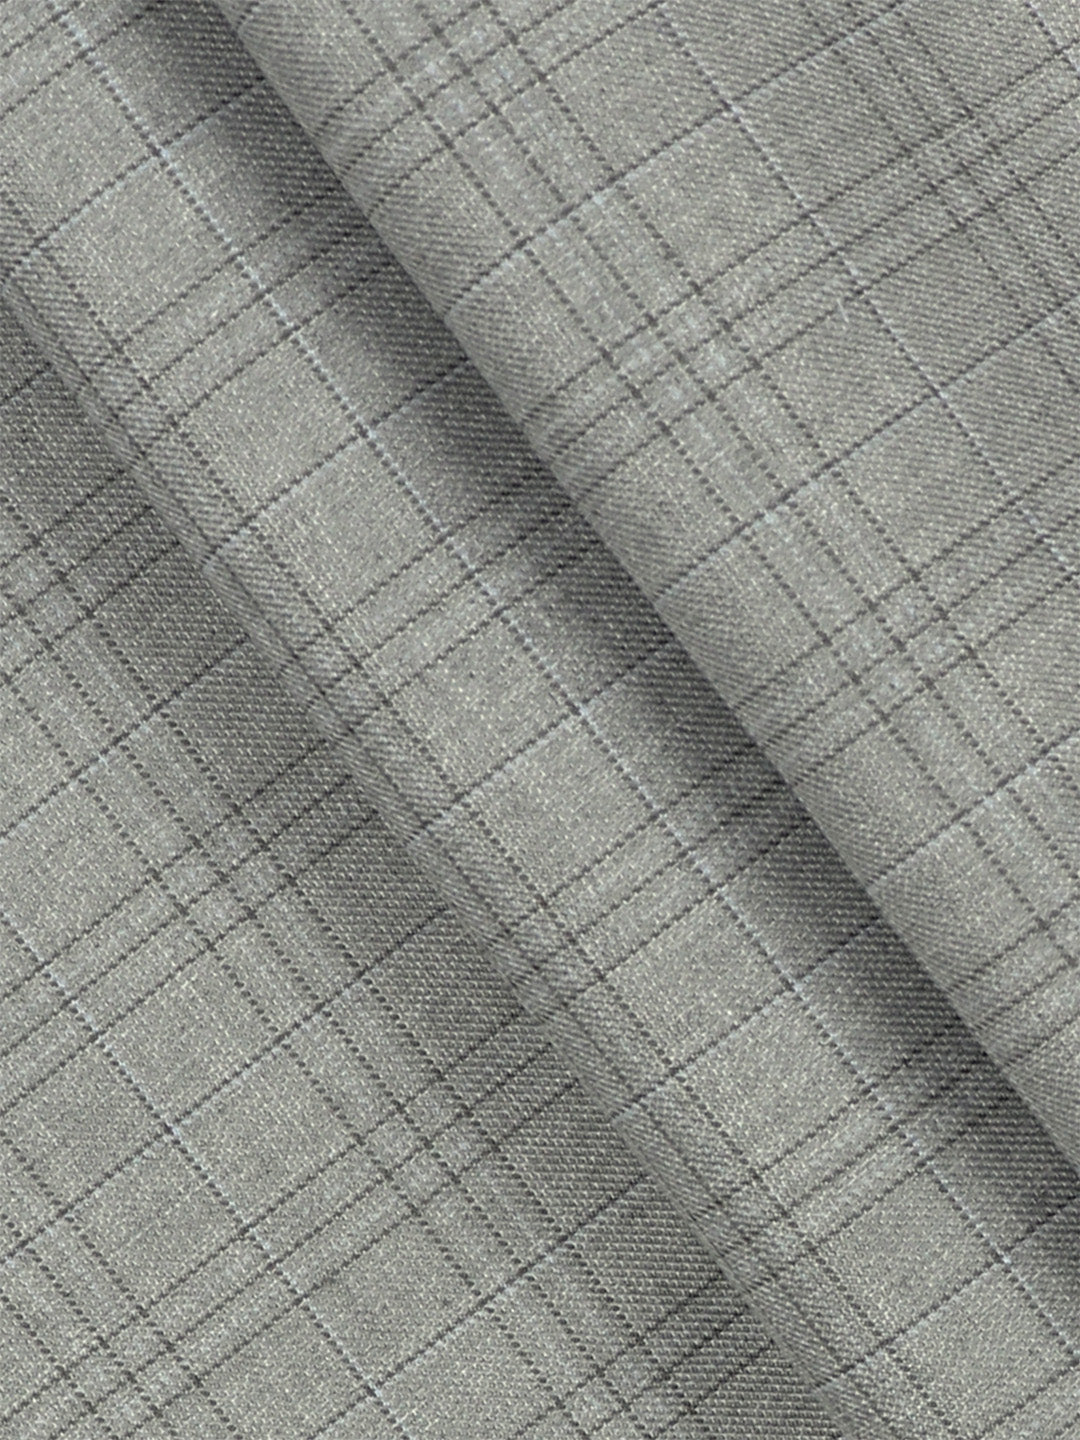 Cotton Grey Colour Checked Pants Fabric Golden Days